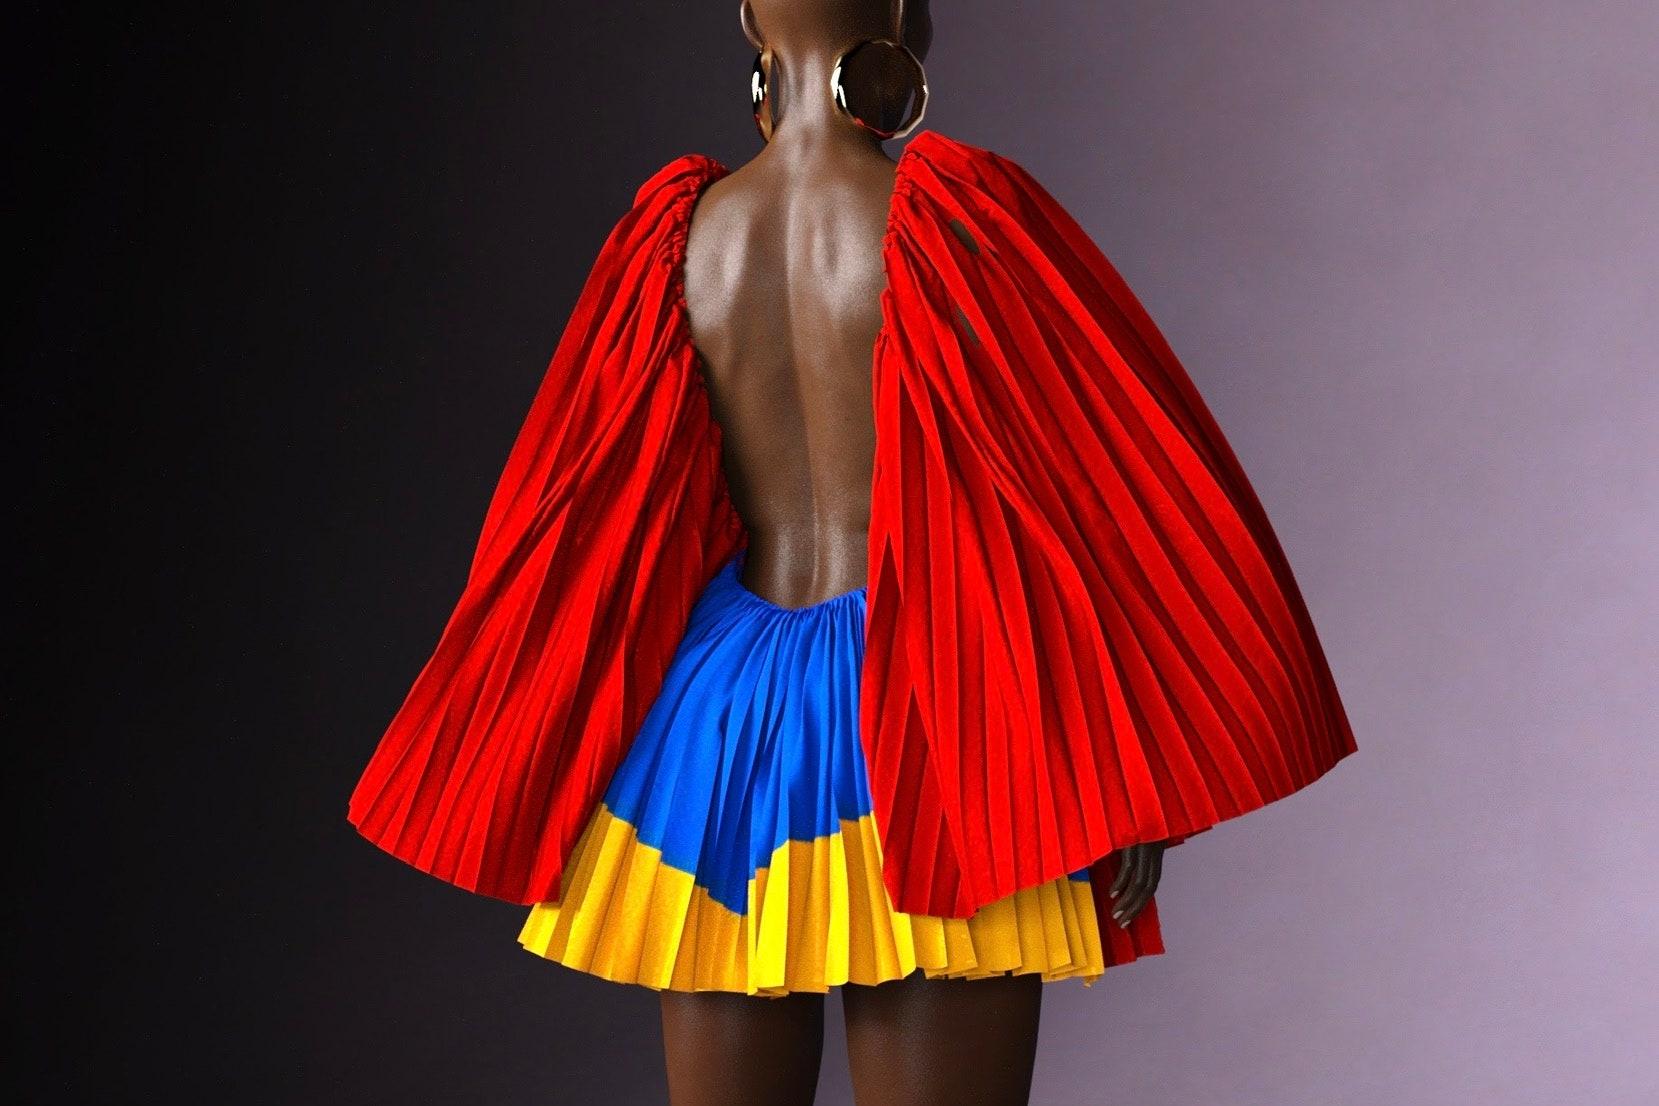 Some of the 3D Model designs used by Anifa Mvuemba in her latest fashion collection released during the COVID19 Pandemic 